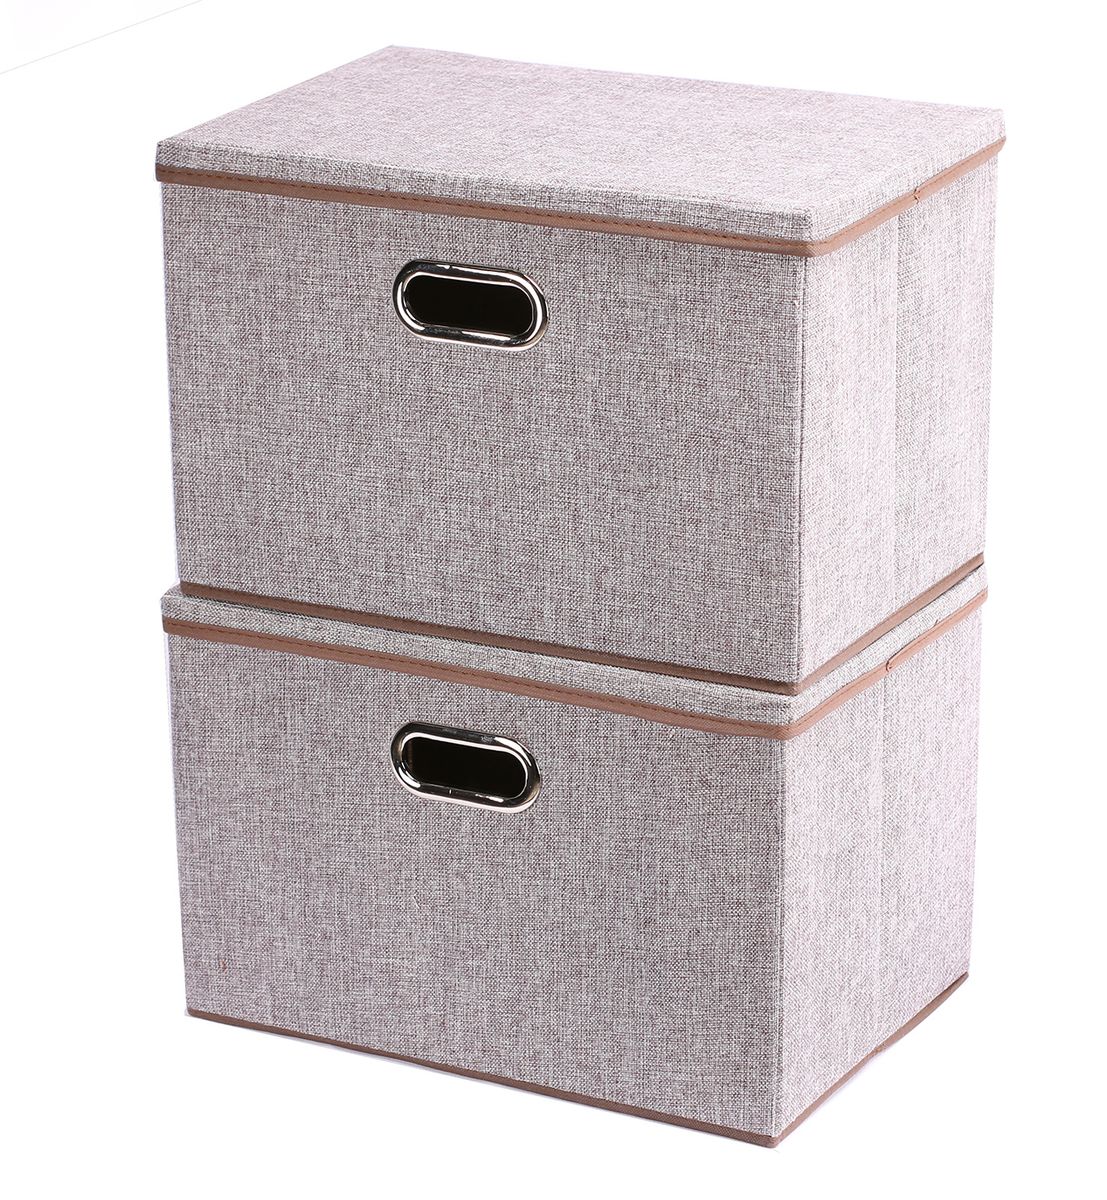 Mix Box Foldable Canvas Storage Box - Two Pack, Shop Today. Get it  Tomorrow!